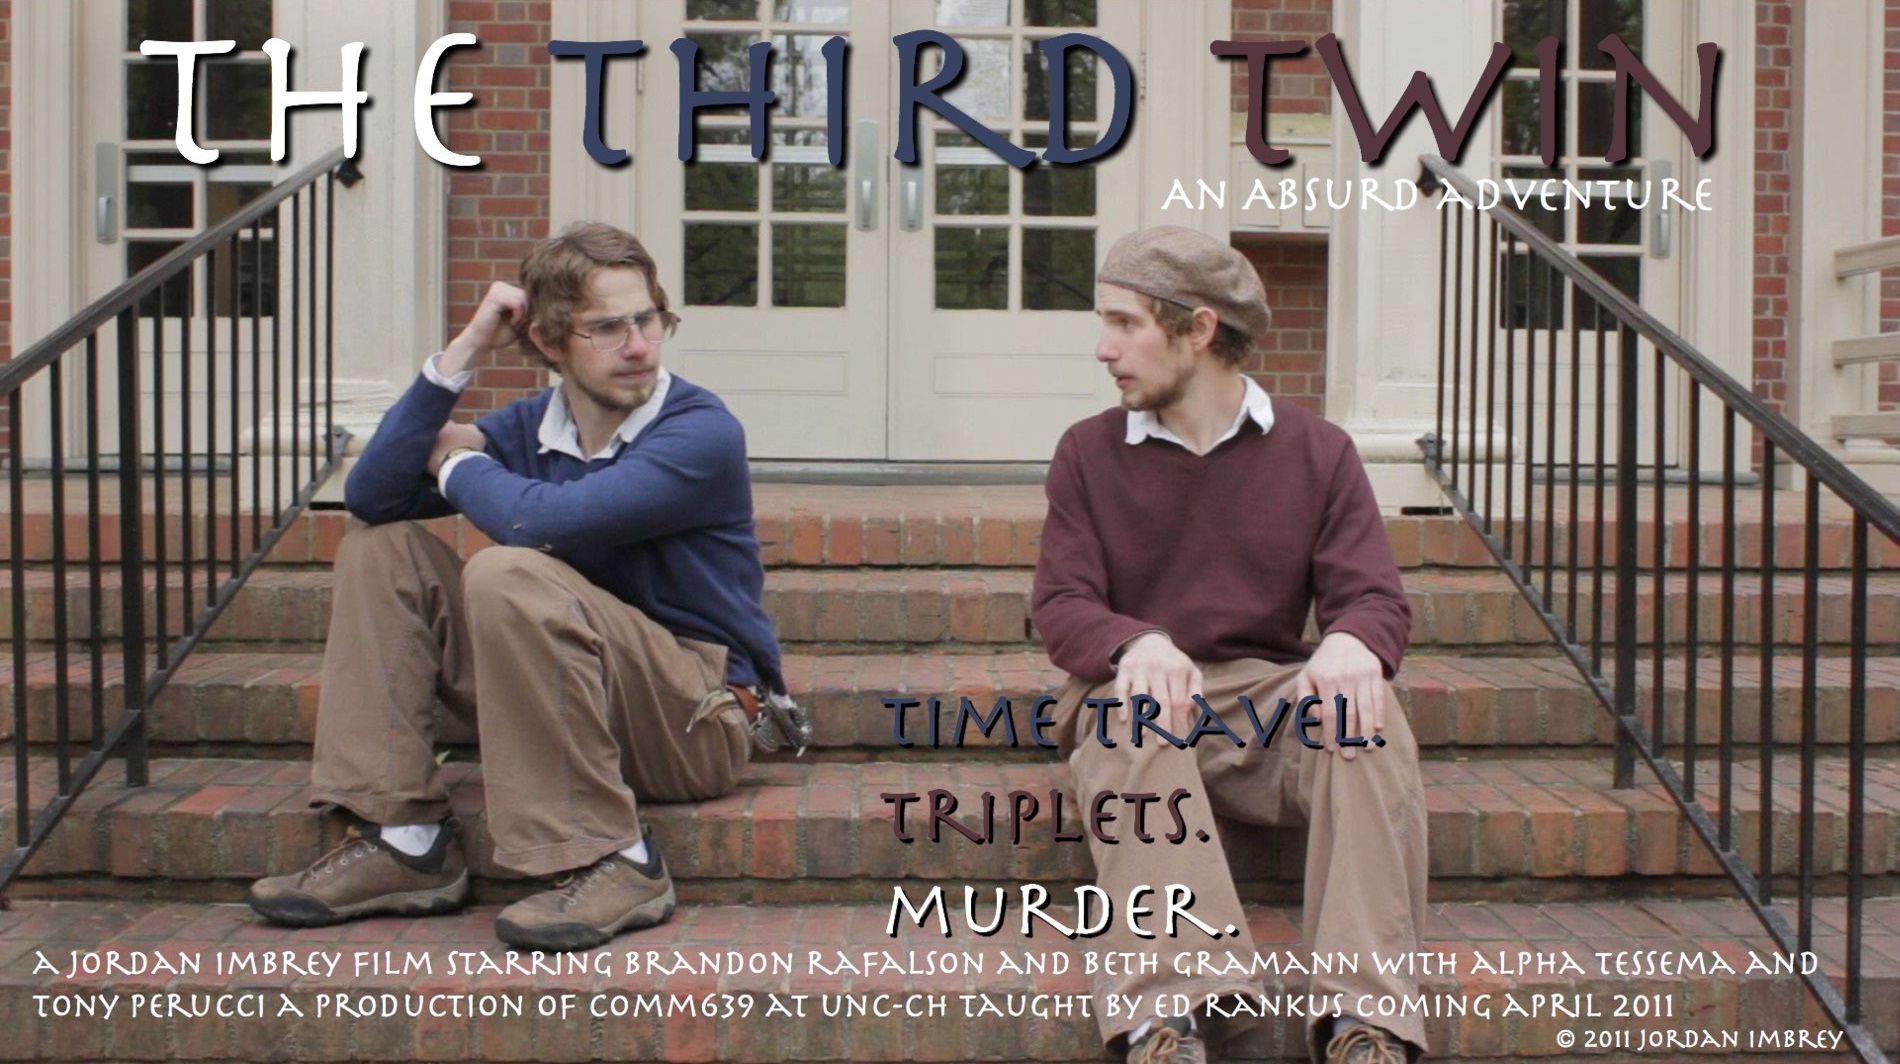 Poster for Experimental Narrative, The Third Twin